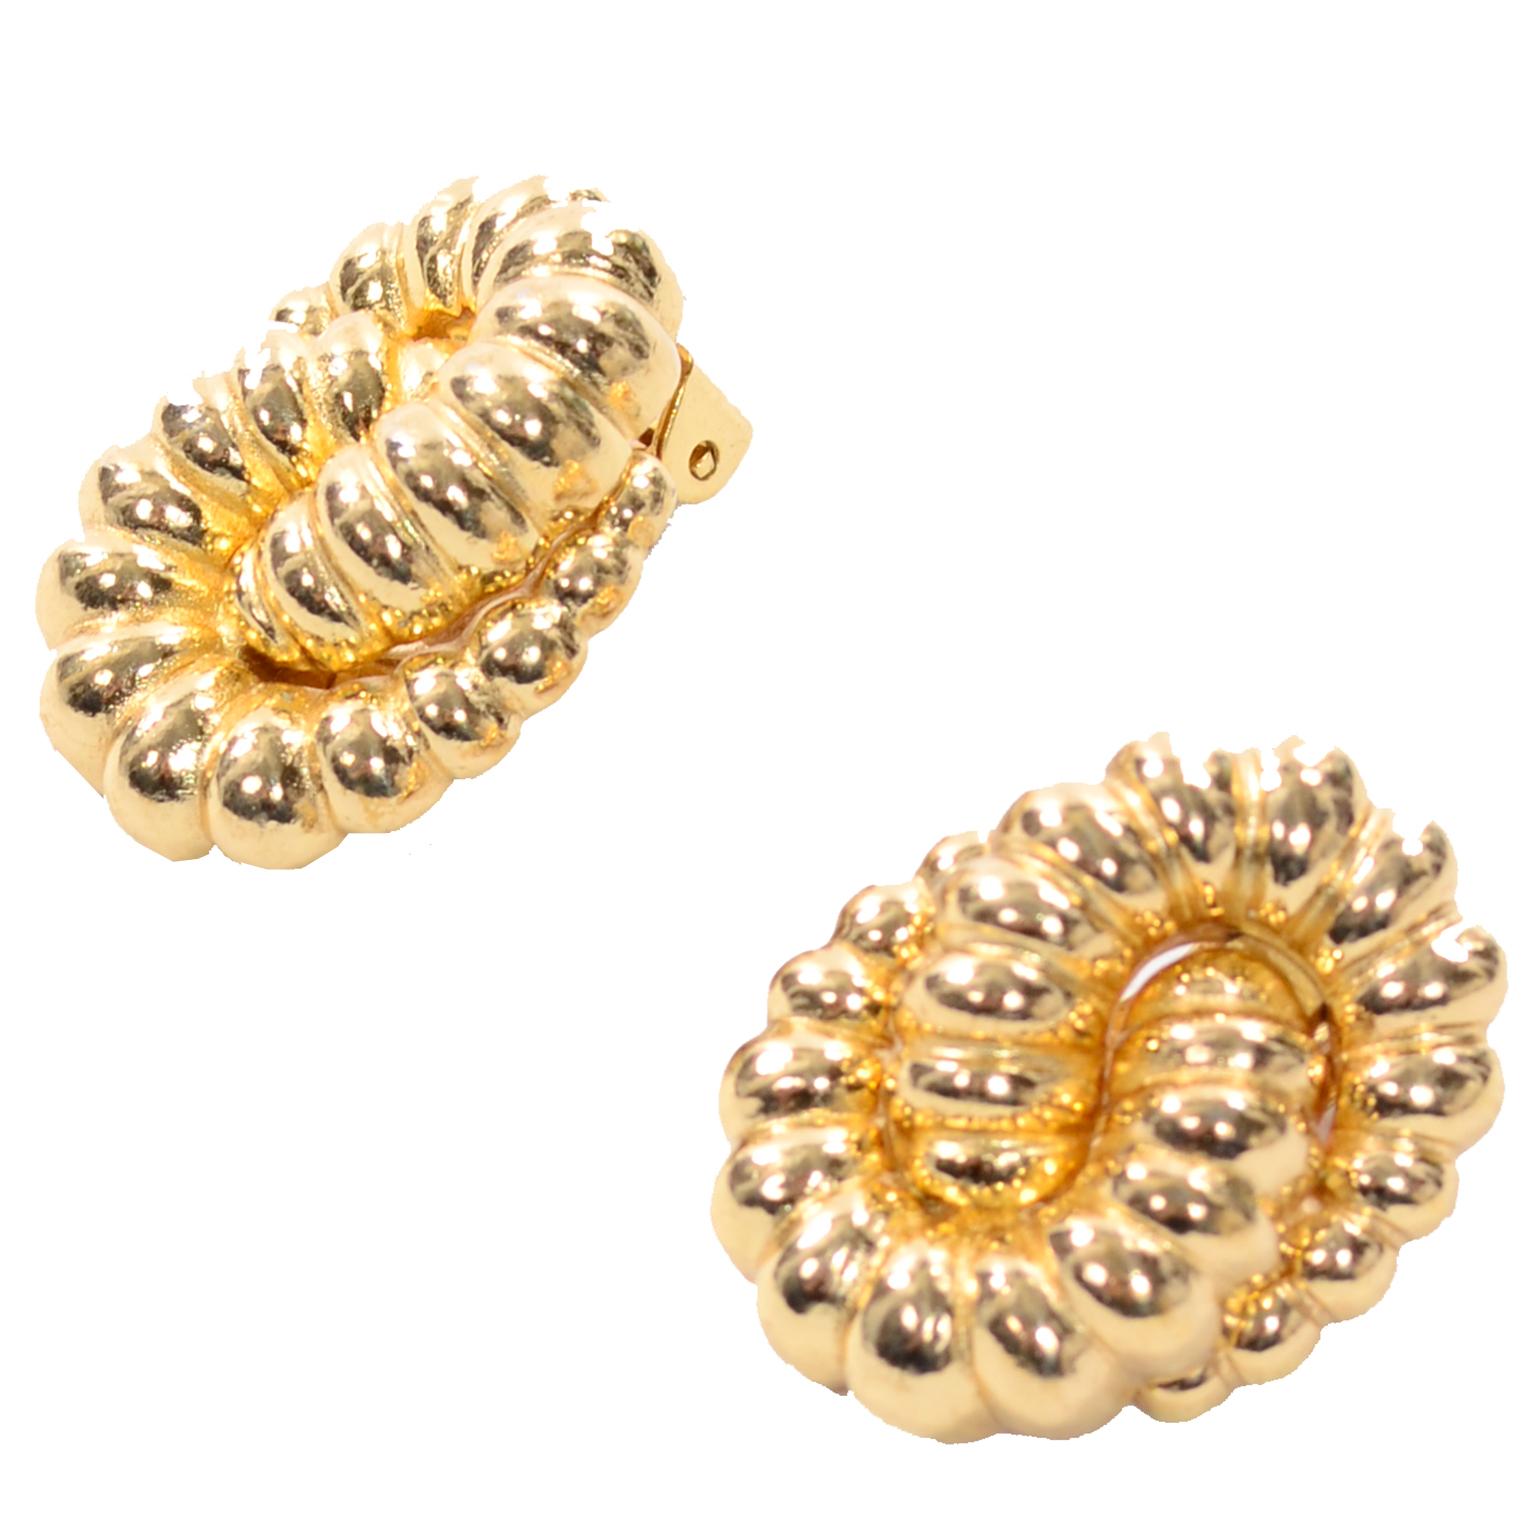 These Christian Dior gold tone earrings are really lovely! We love the knotted textured loops in a classic clip on style. The earrings are signed and are a nice medium, comfortable weight.
MEASUREMENTS:
LENGTH: 1 1/4